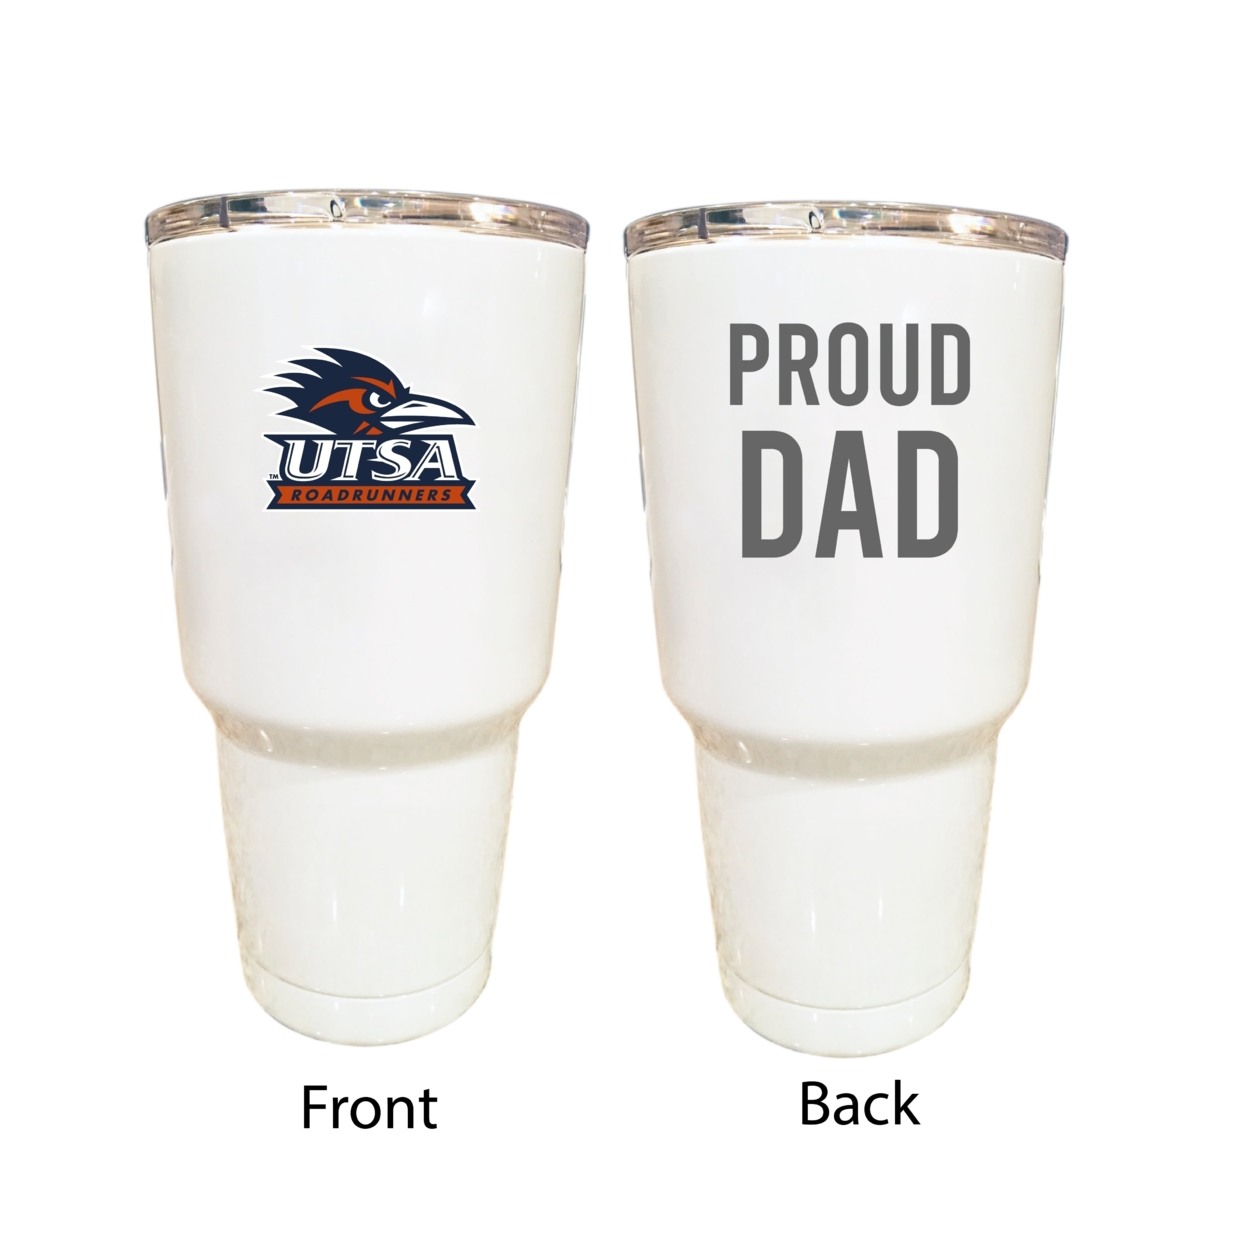 UTSA Road Runners Proud Dad 24 Oz Insulated Stainless Steel Tumblers Choose Your Color. - White